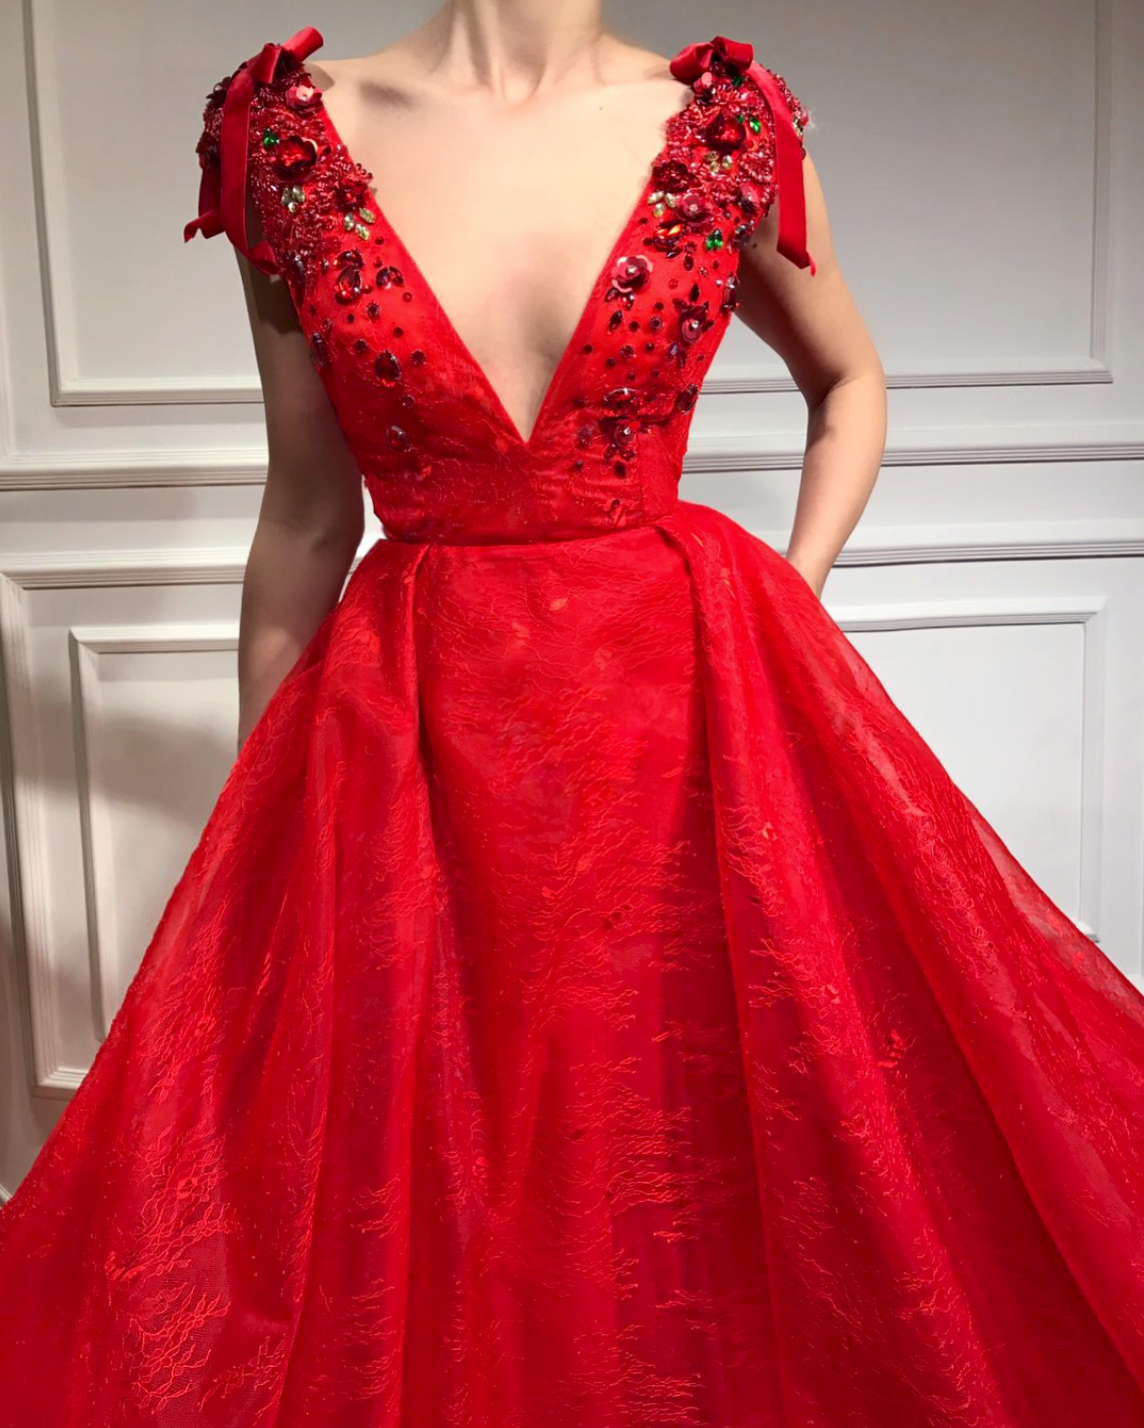 Red A-Line dress with no sleeves, v-neck and embroidery